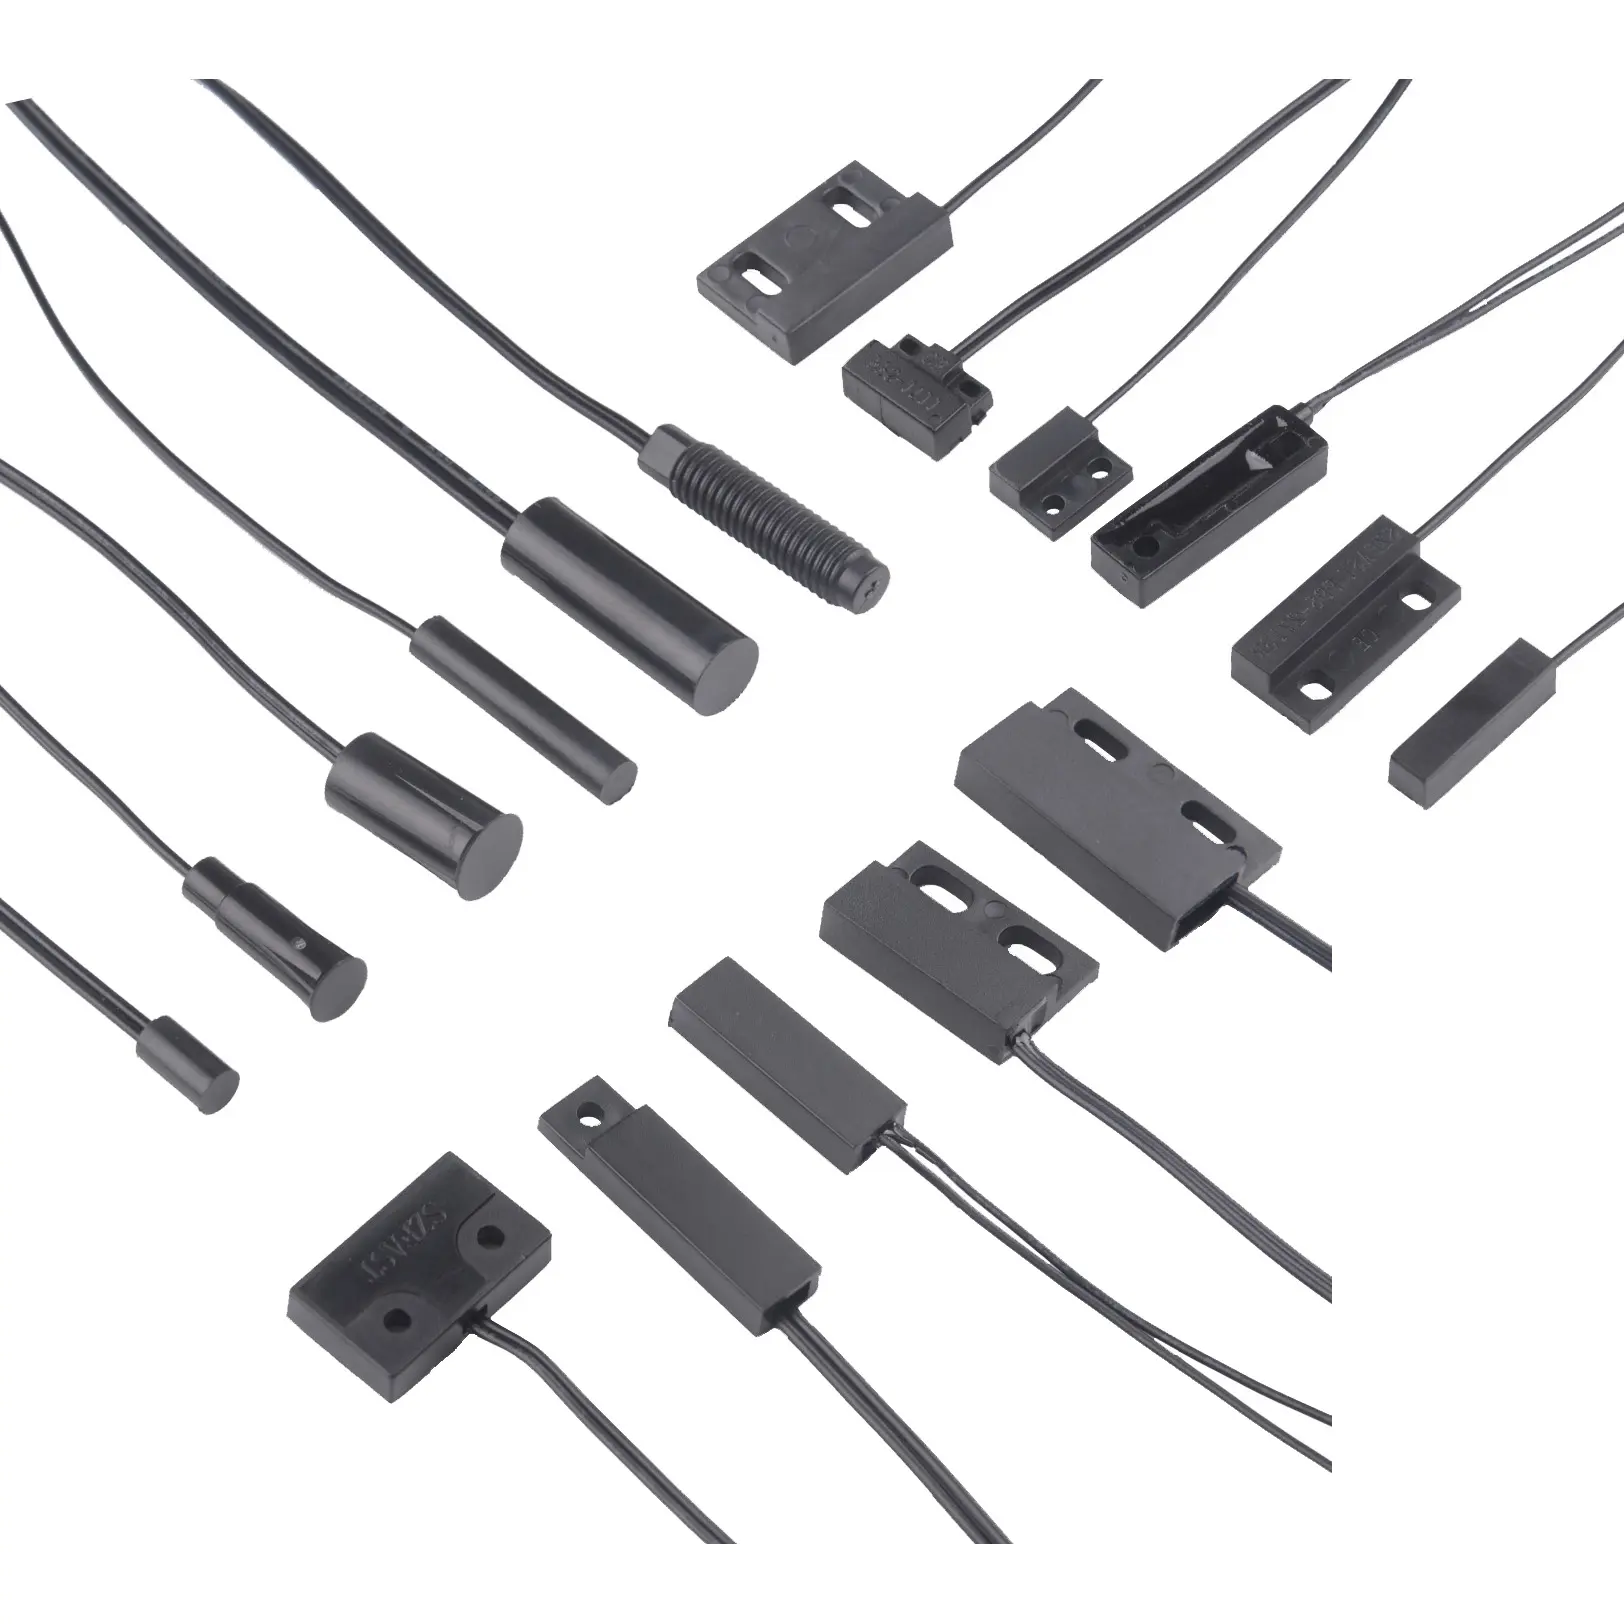 China supplier magnetic door contact reed switch sensor with good quality